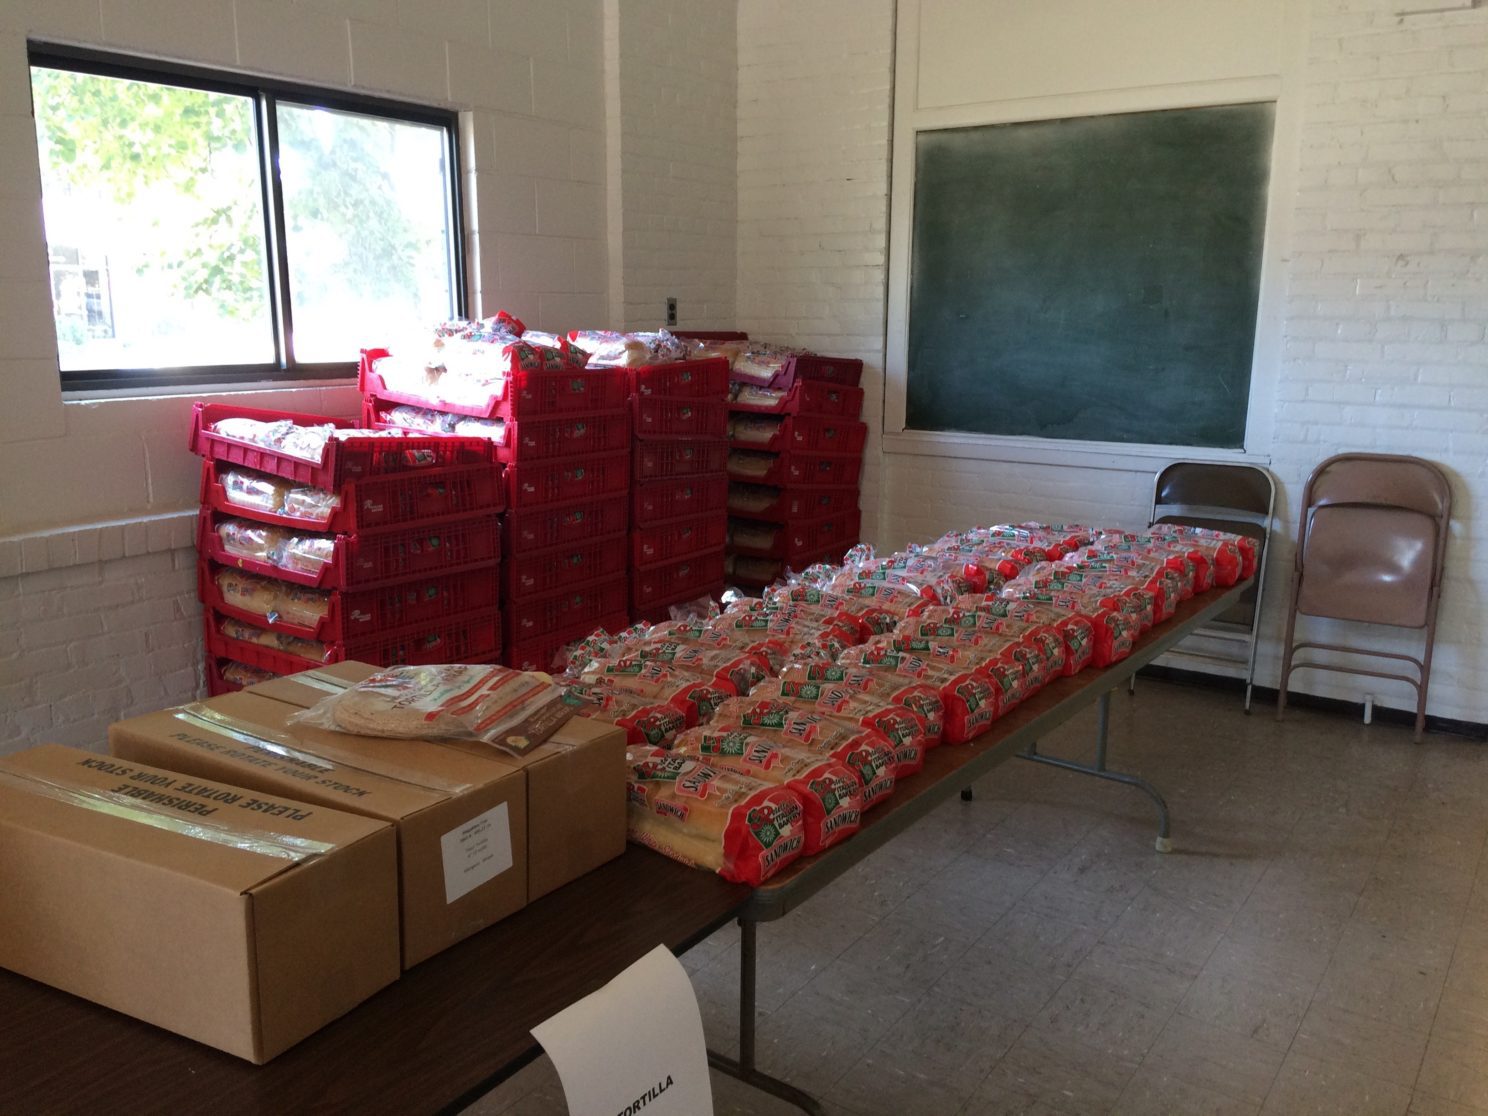 Table and pallettes of food at the food pantry